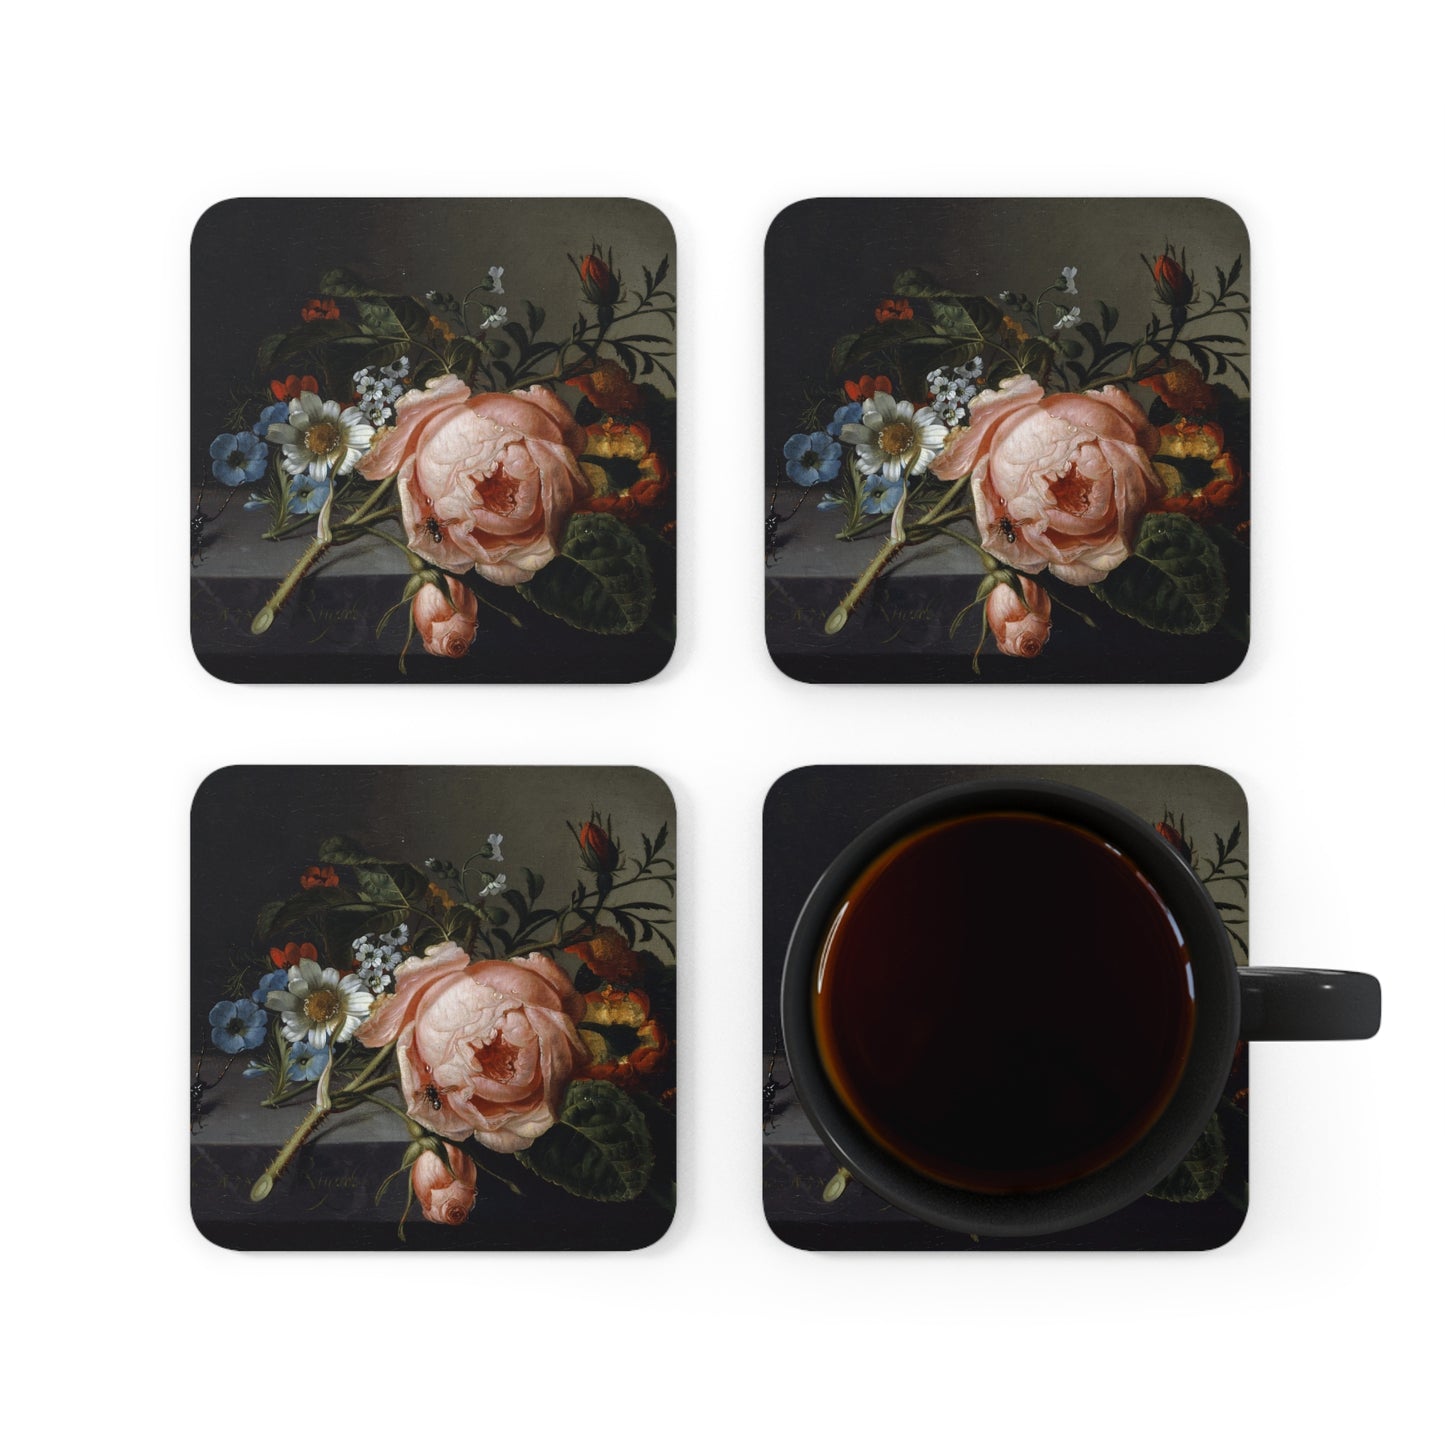 RACHEL RUYSCH - STILL LIFE WITH ROSE BRANCH, BEETLE AND BEE - COASTER SET